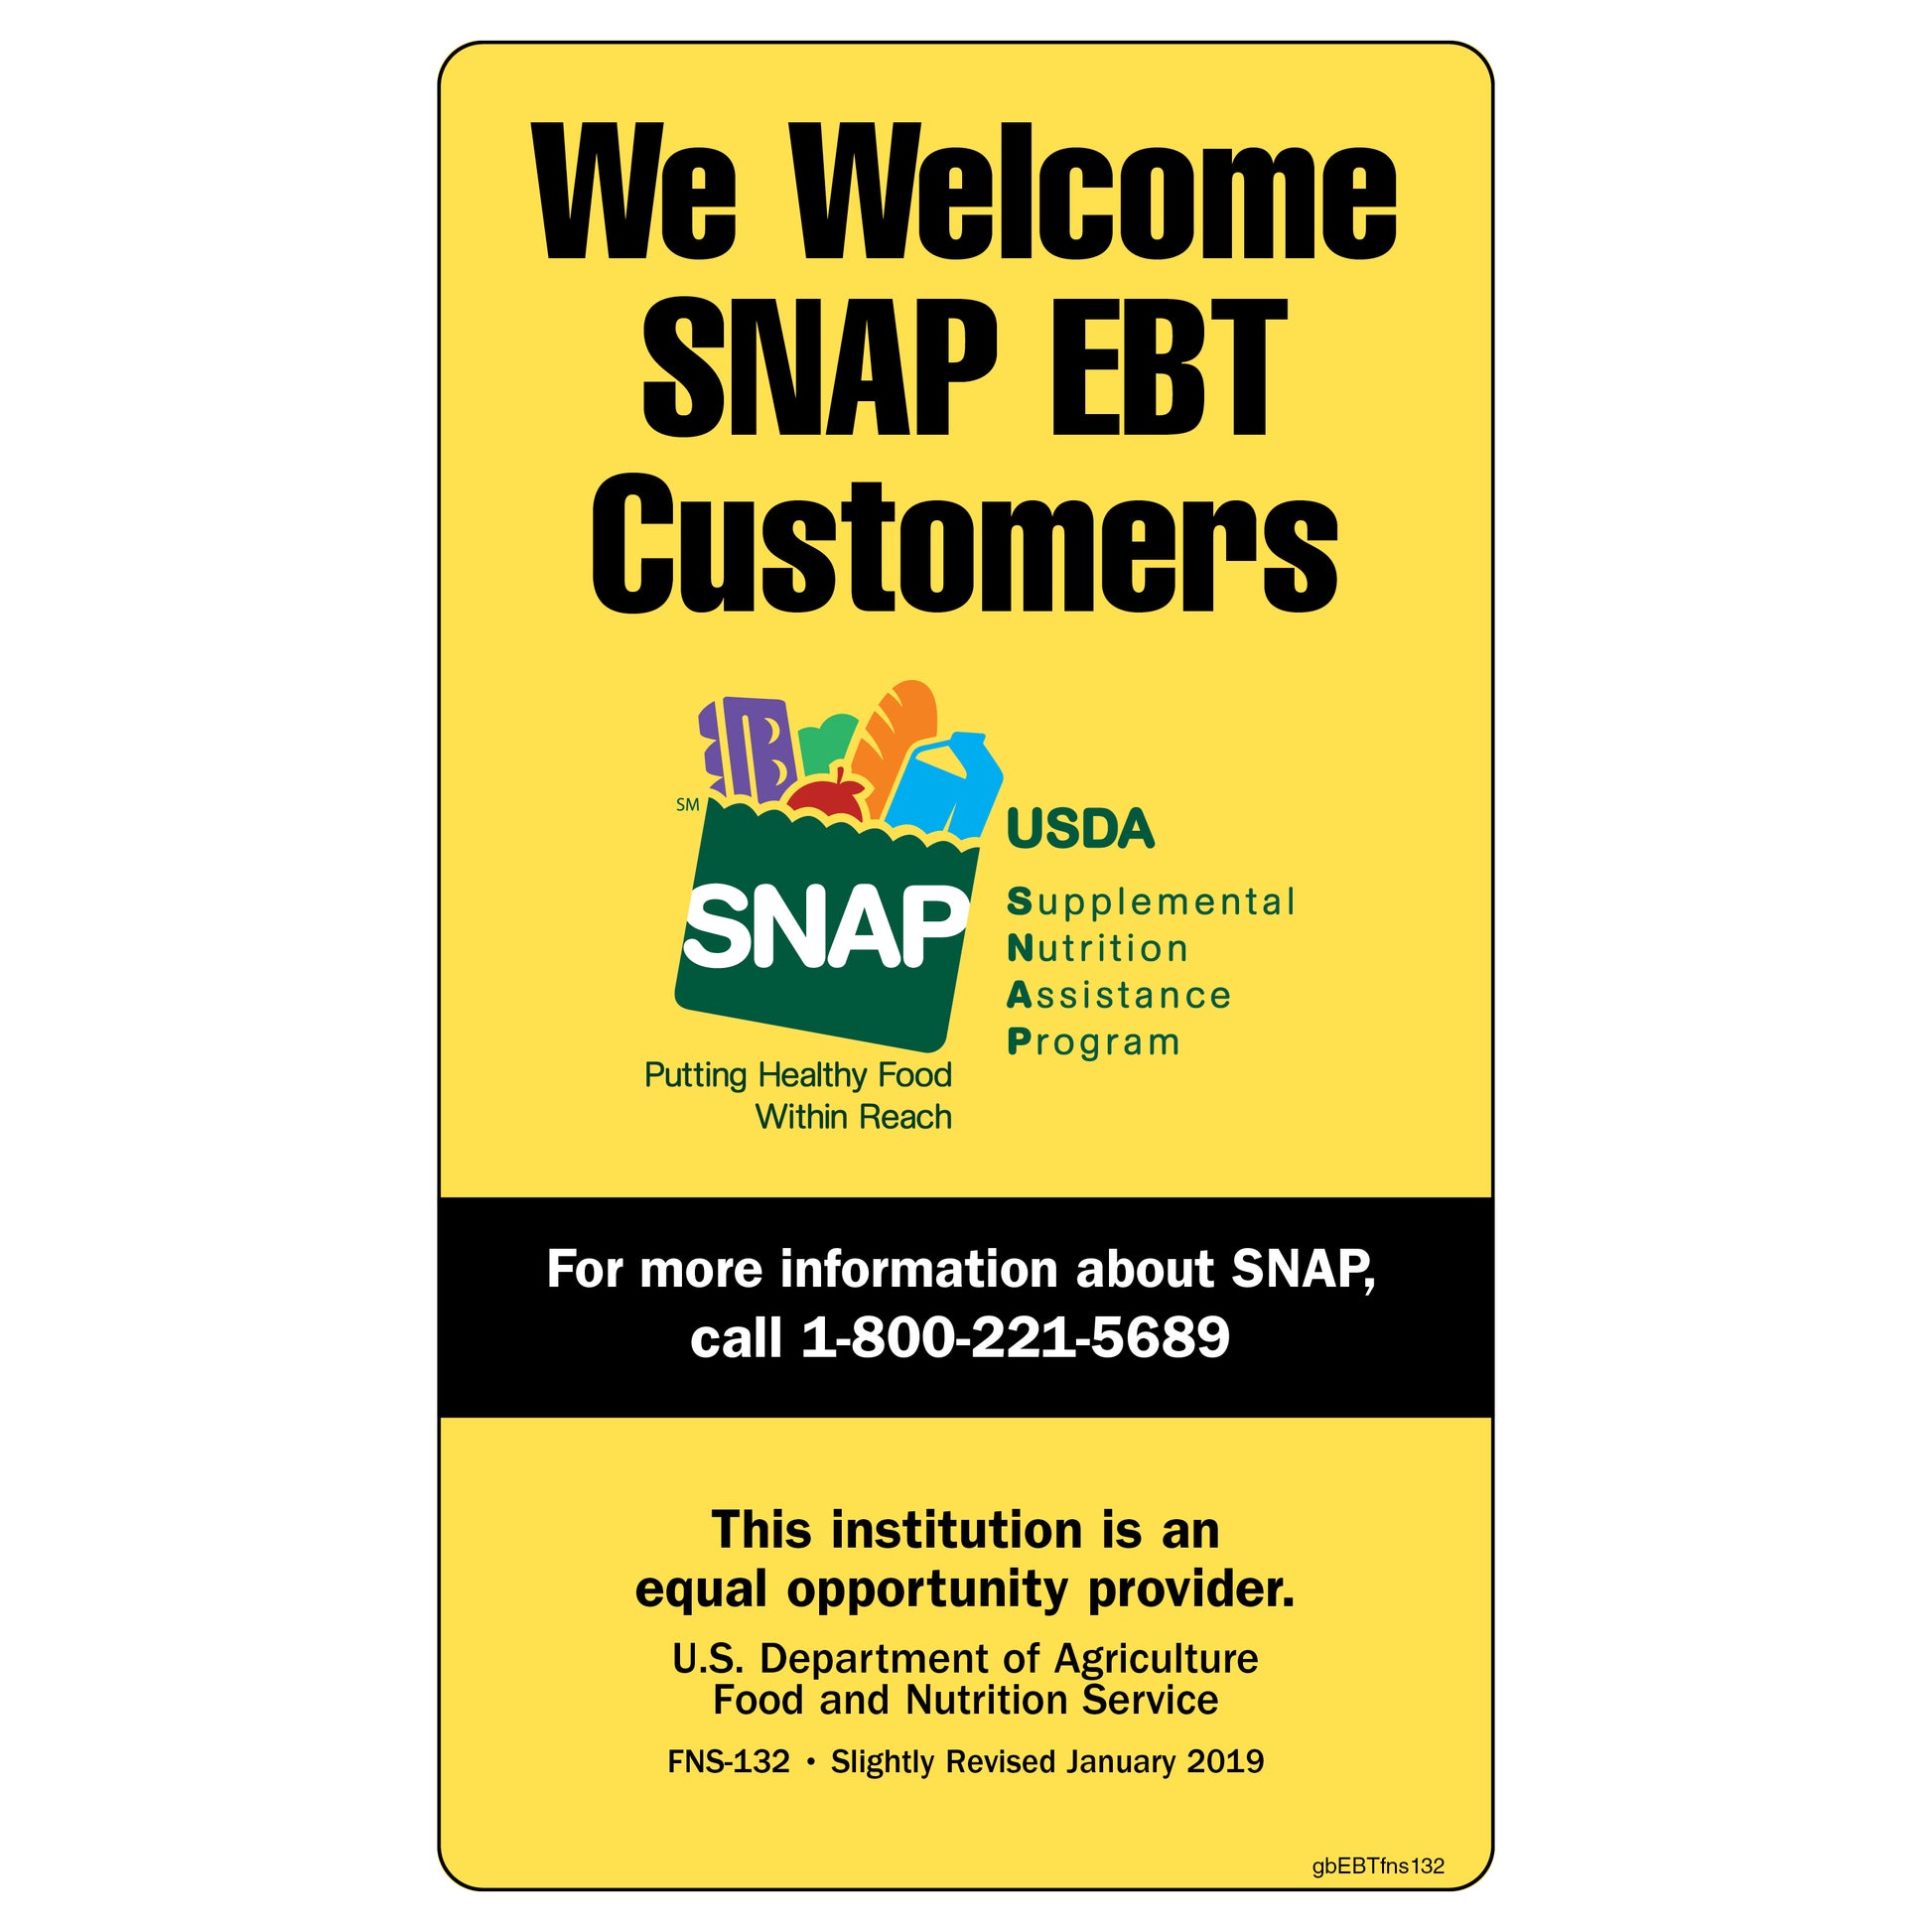 We welcome SNAP EBT customers decal. USDA Food & Nutrition Service FNS-132 decal updated January 2019